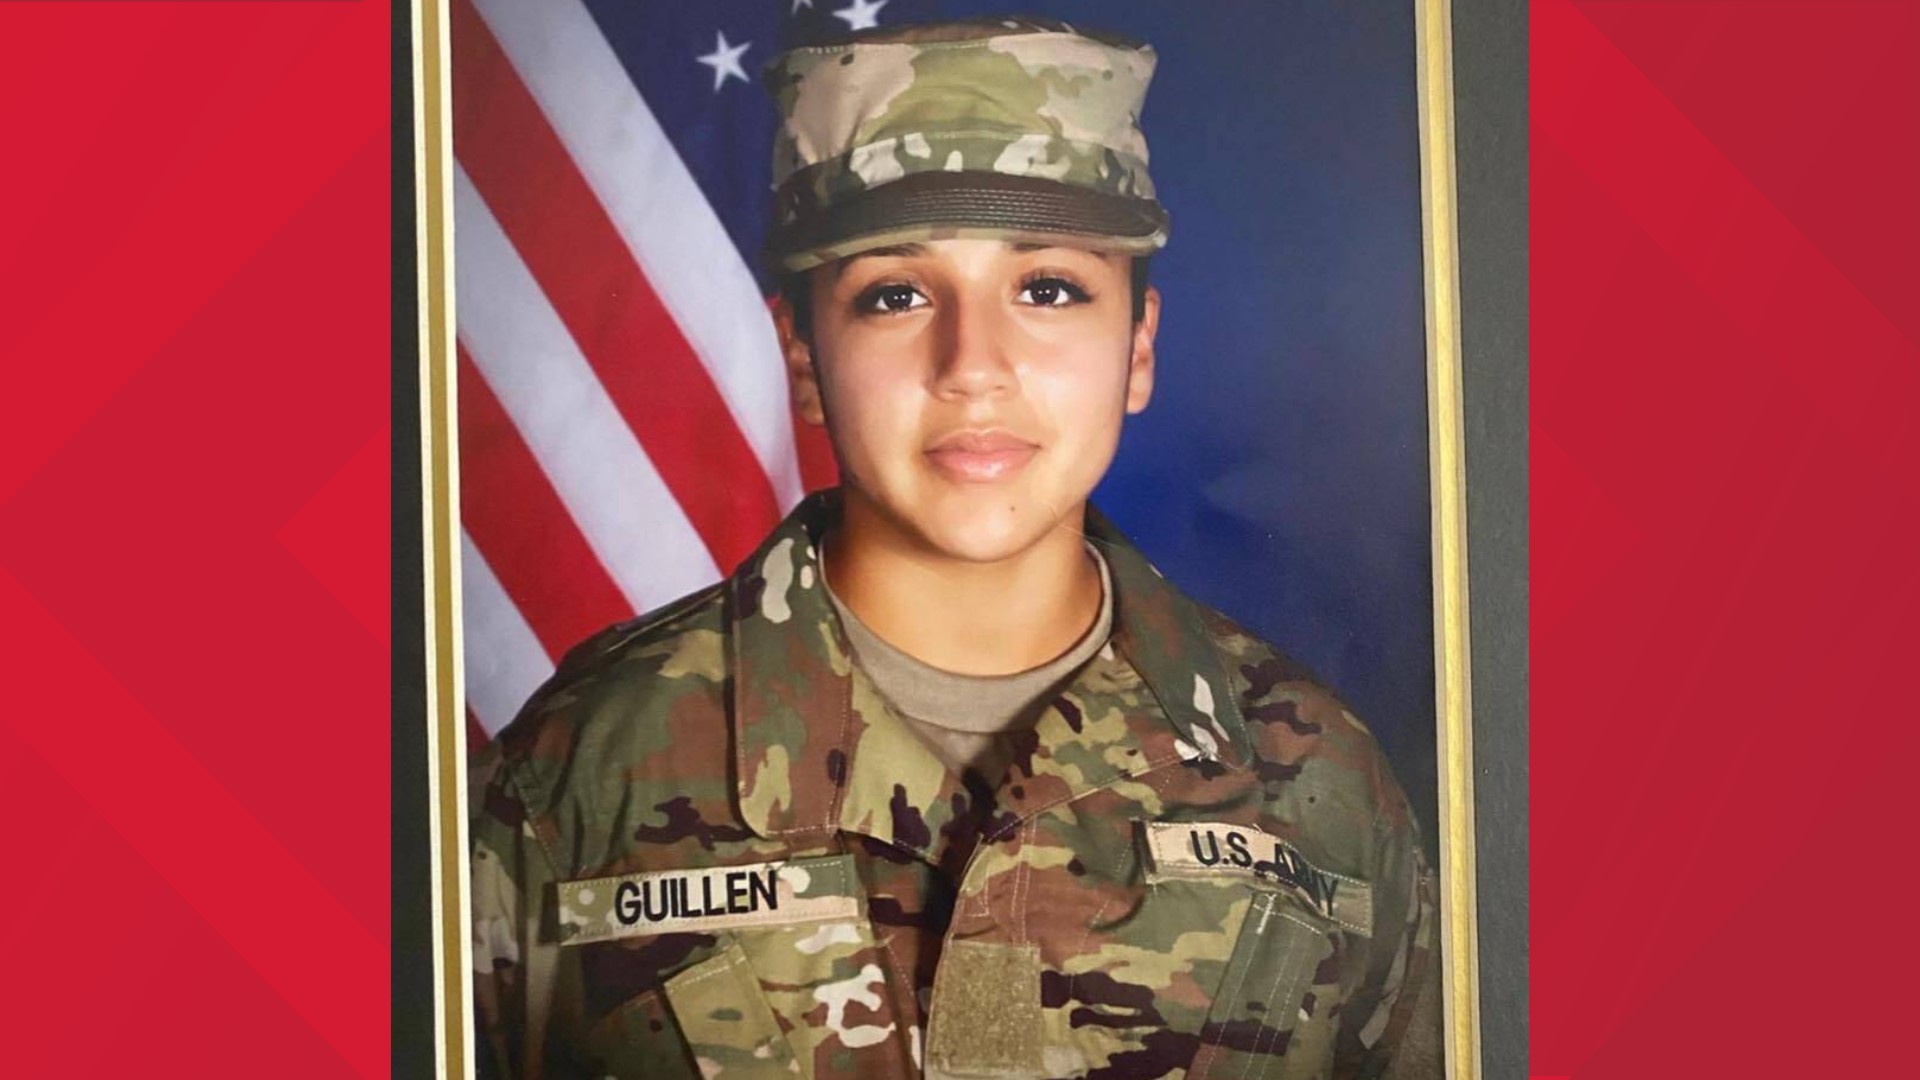 Fort Hood Senior Commander Maj. Gen. Scott Efflandt said the remains found in Bell County had officially been identified as Vanessa Guillen.